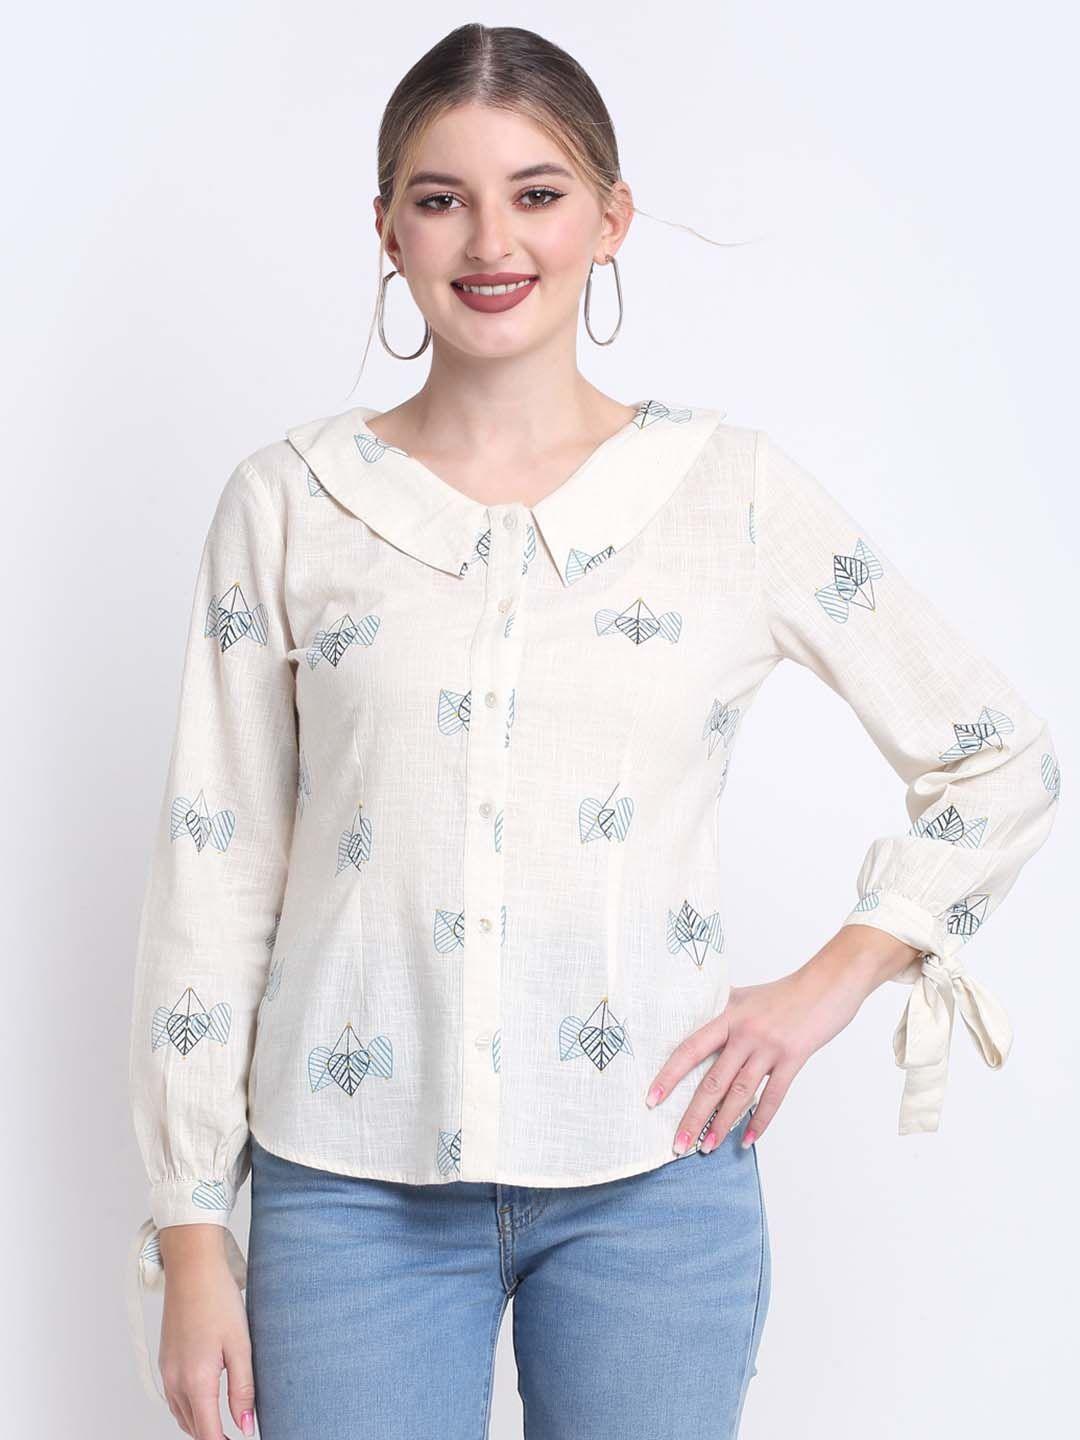 faabriq-floral-printed-peter-pan-collar-pure-cotton-shirt-style-top